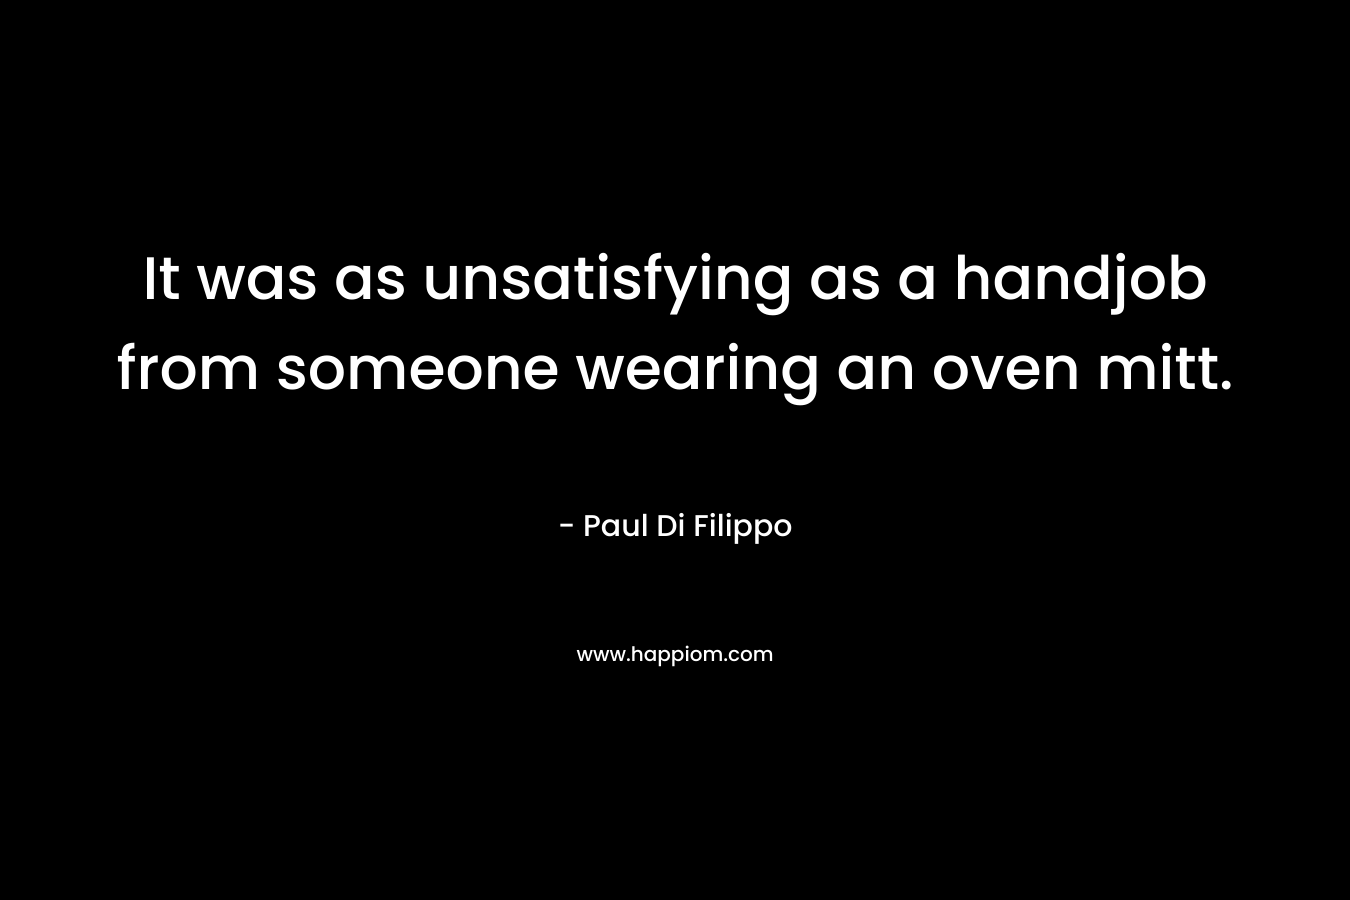 It was as unsatisfying as a handjob from someone wearing an oven mitt. – Paul Di Filippo